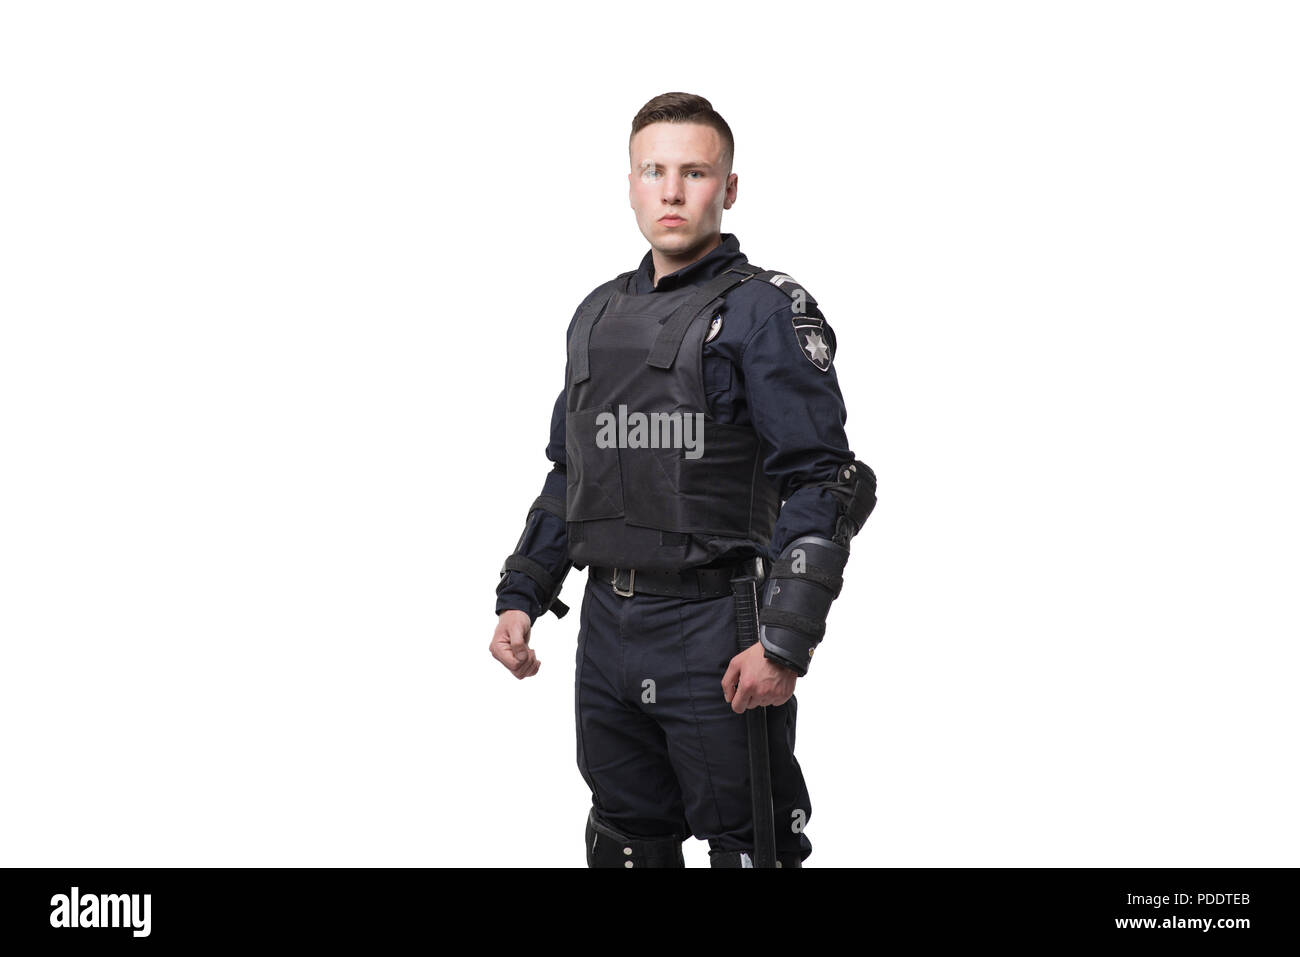 Armed police officer isolated on white background Stock Photo